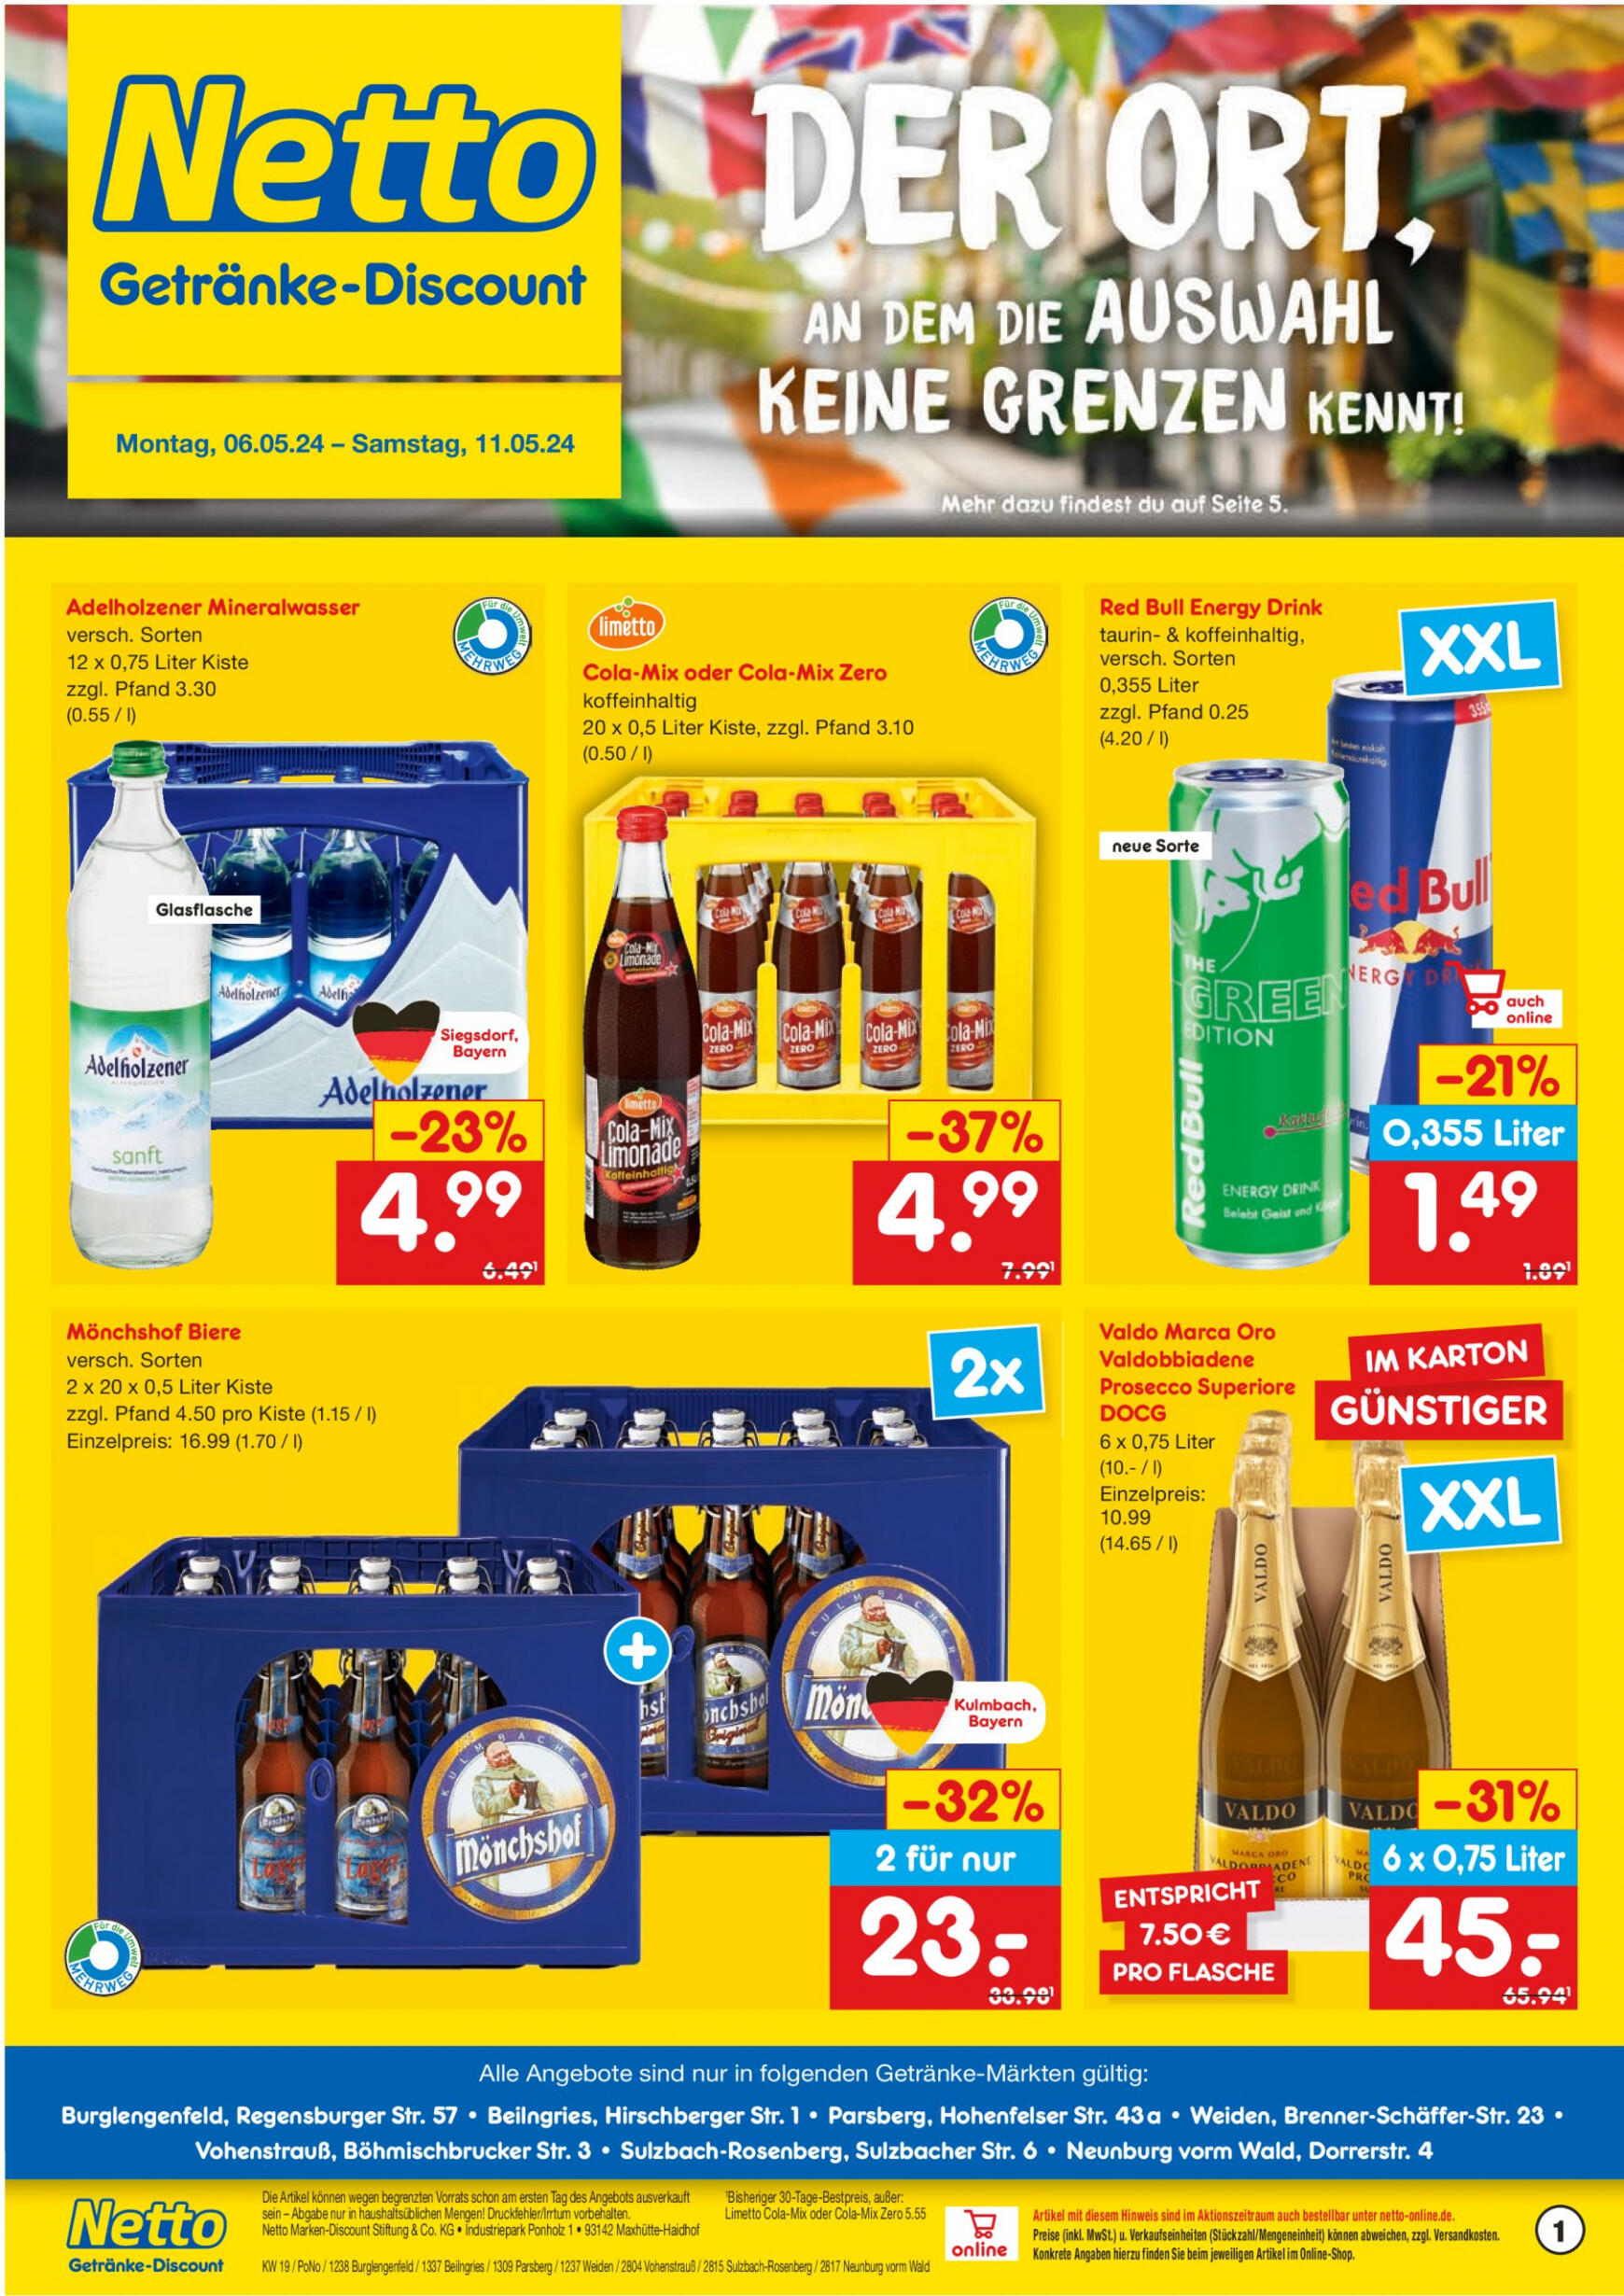 netto - Flyer Netto aktuell 06.05. - 11.05. - page: 1